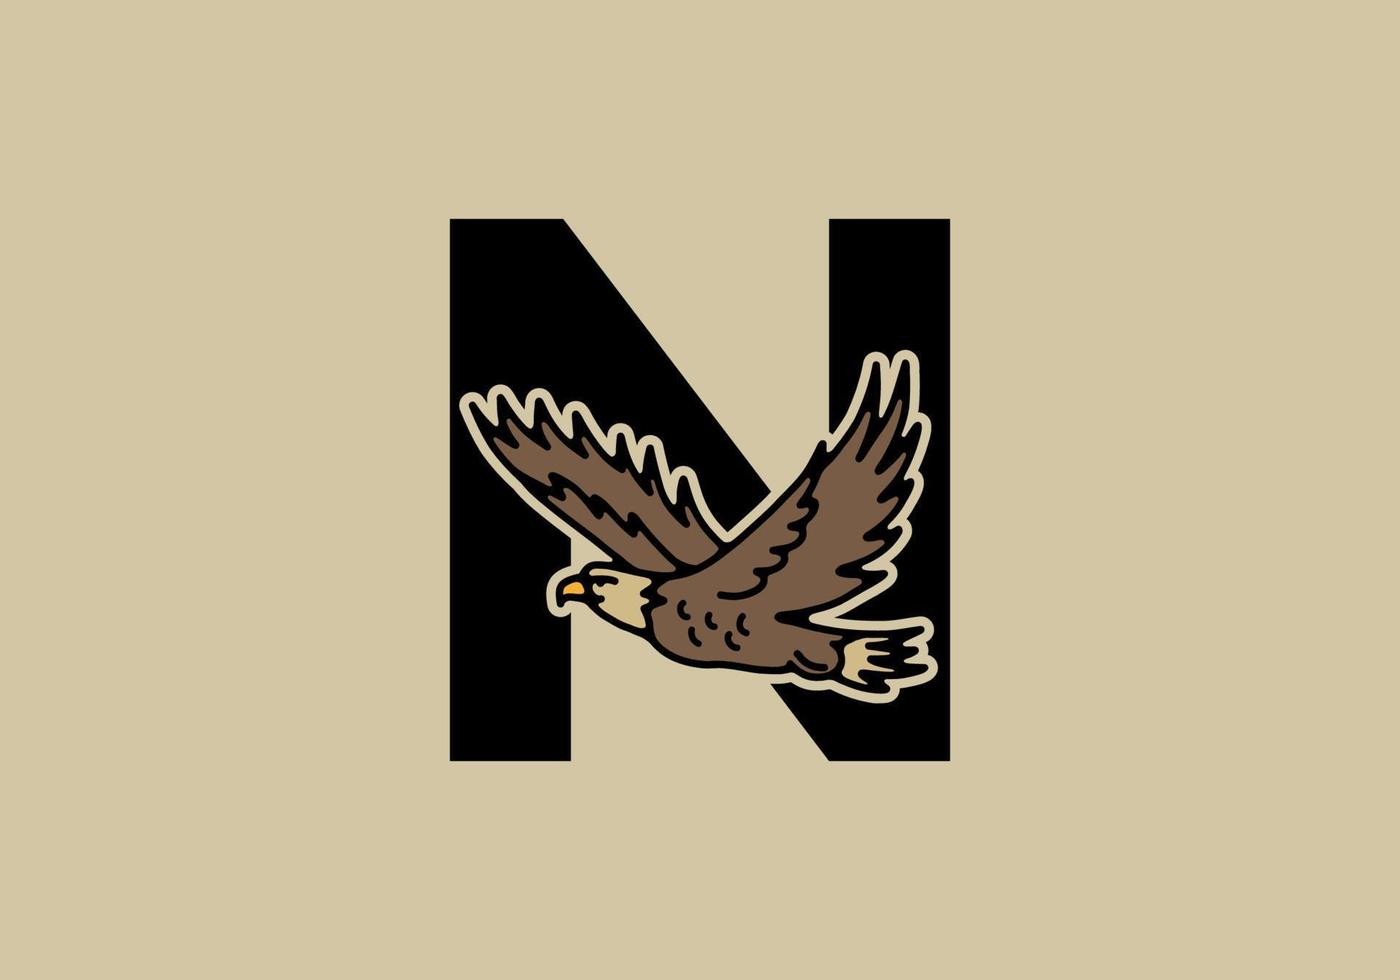 Line art illustration of flying eagle with N initial letter vector